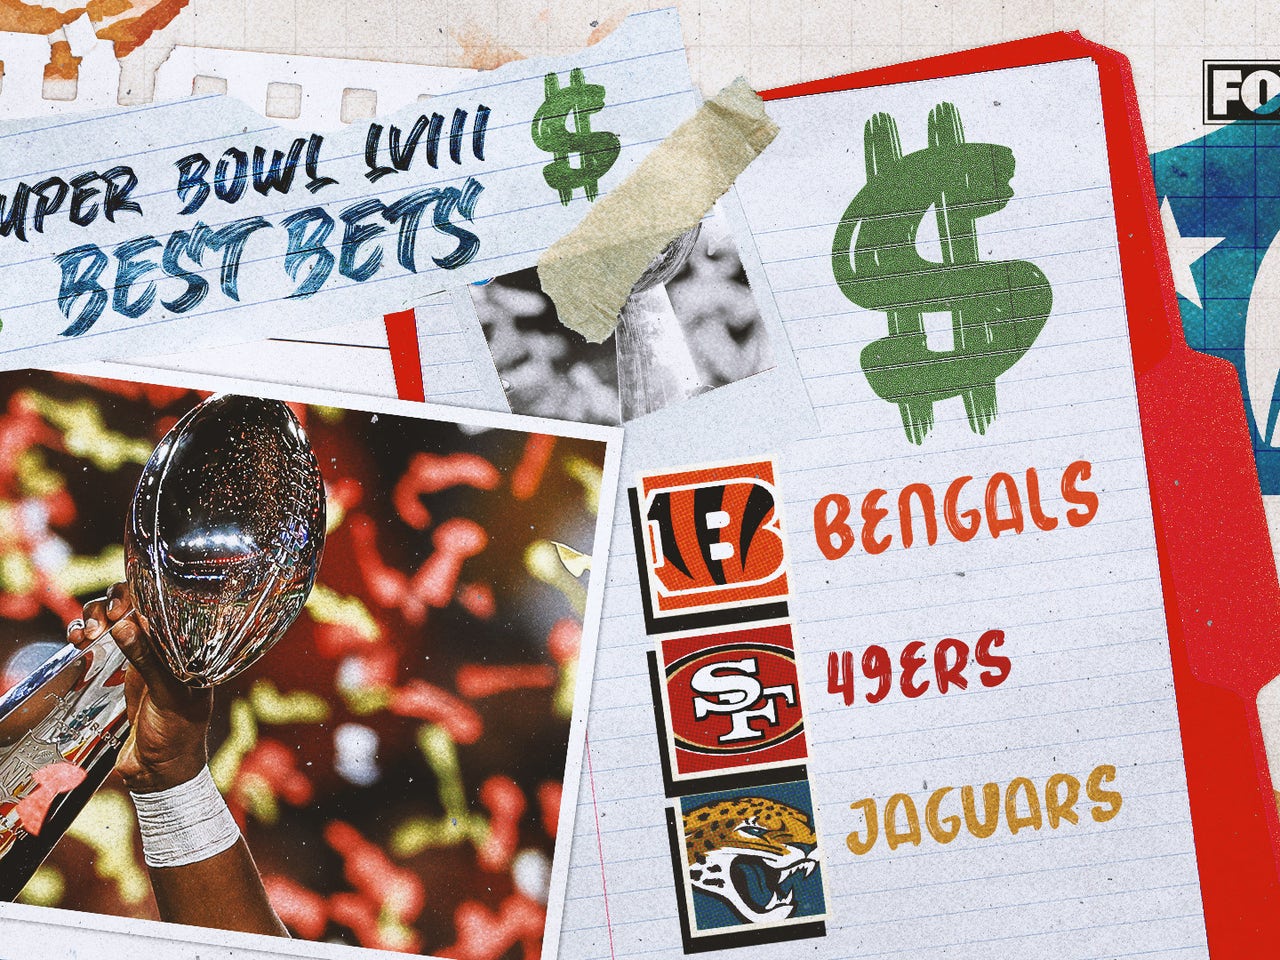 nfl bets to make